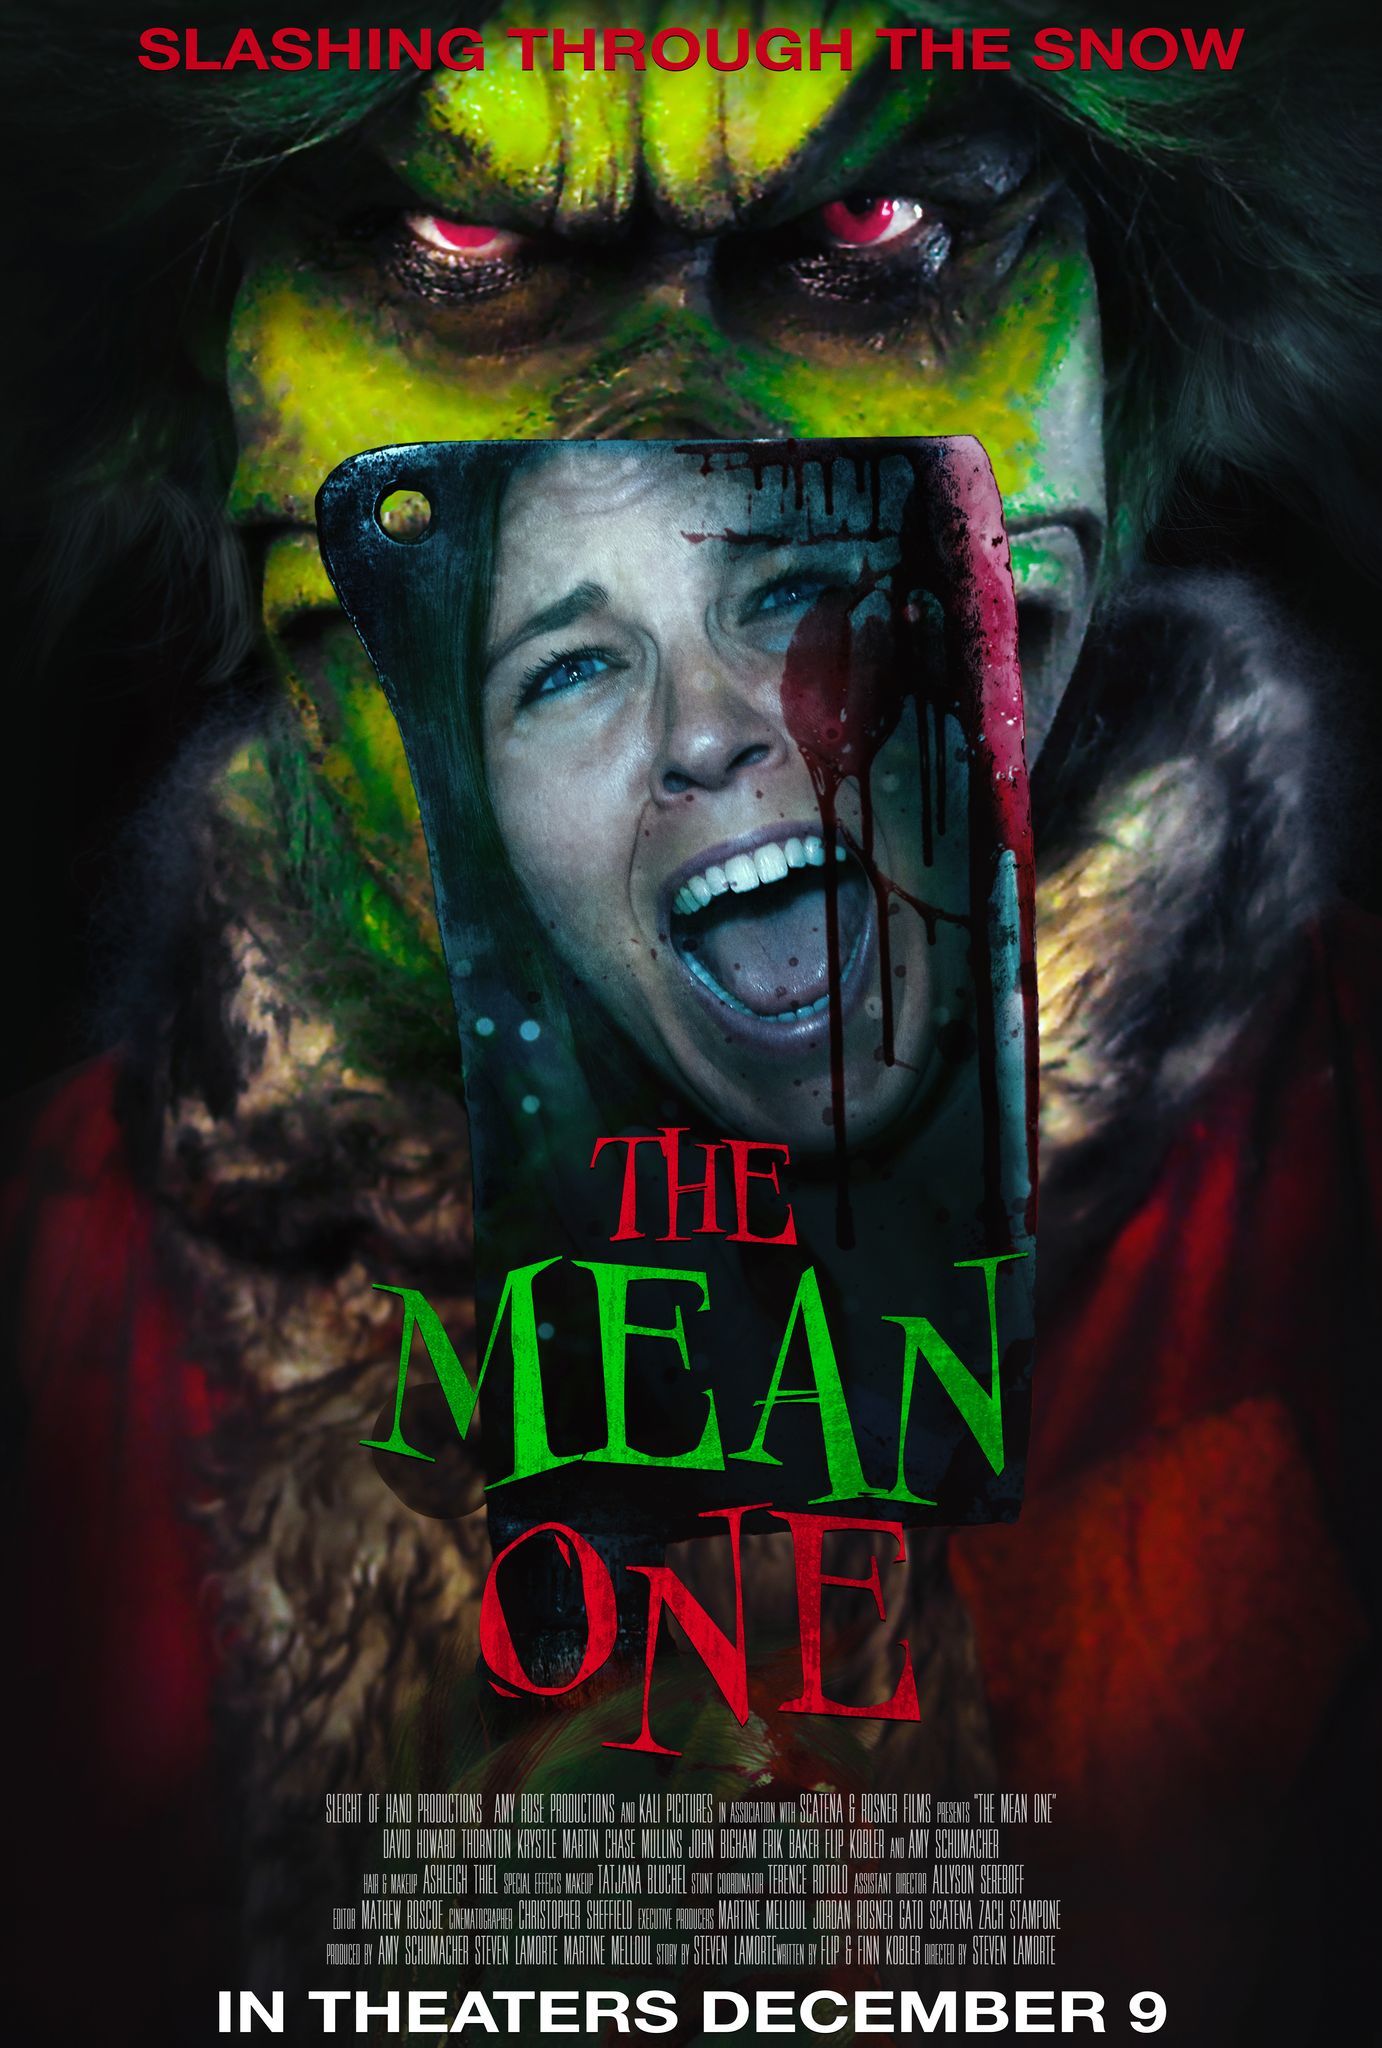 the mean horror poster